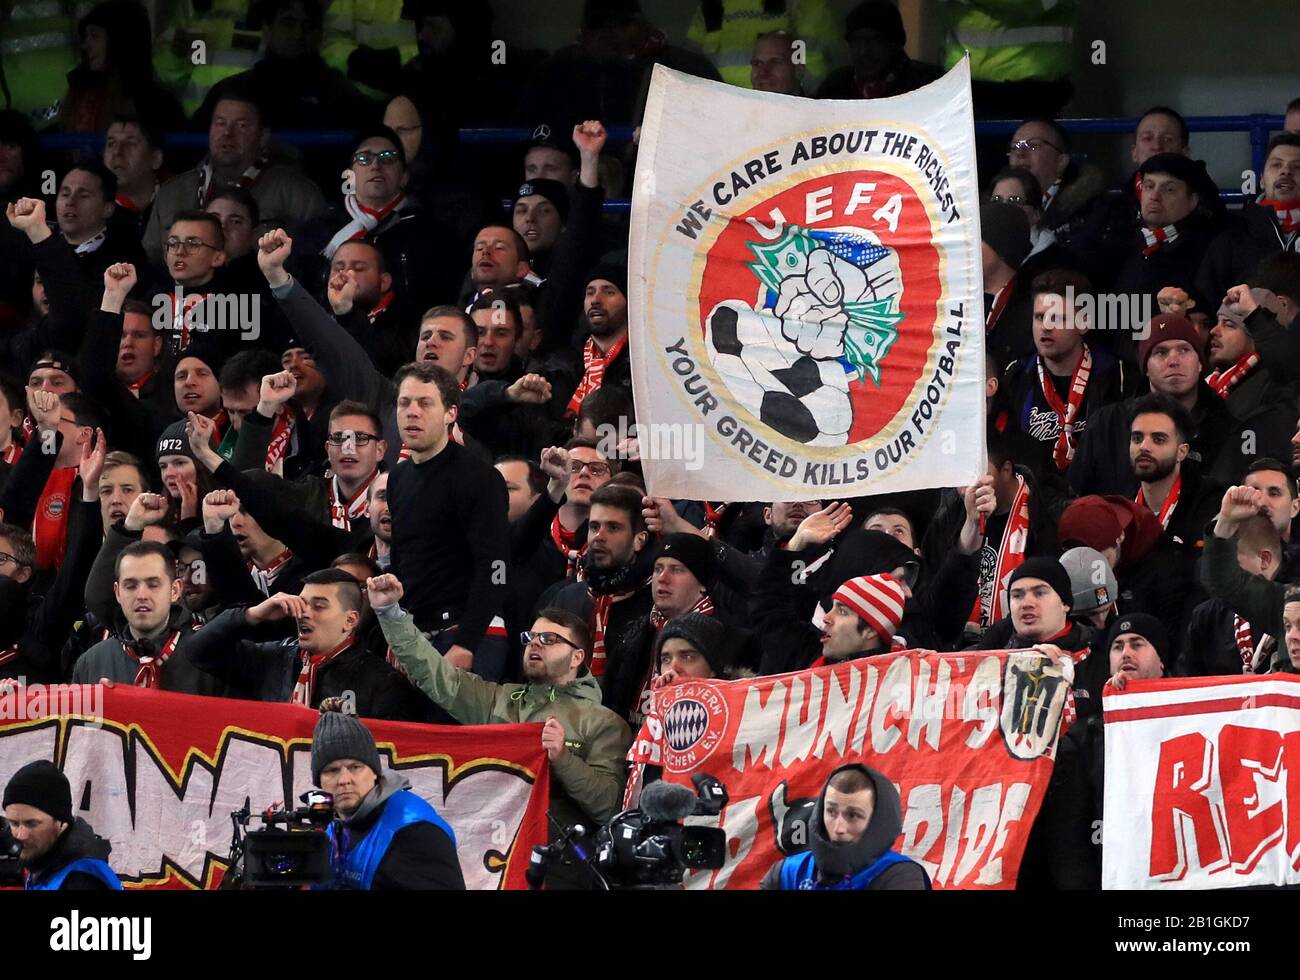 Bayern Munich fans hold a banner protesting against ticket prices in the stands during the UEFA Champions League round of 16 first leg match at Stamford Bridge, London. Stock Photo